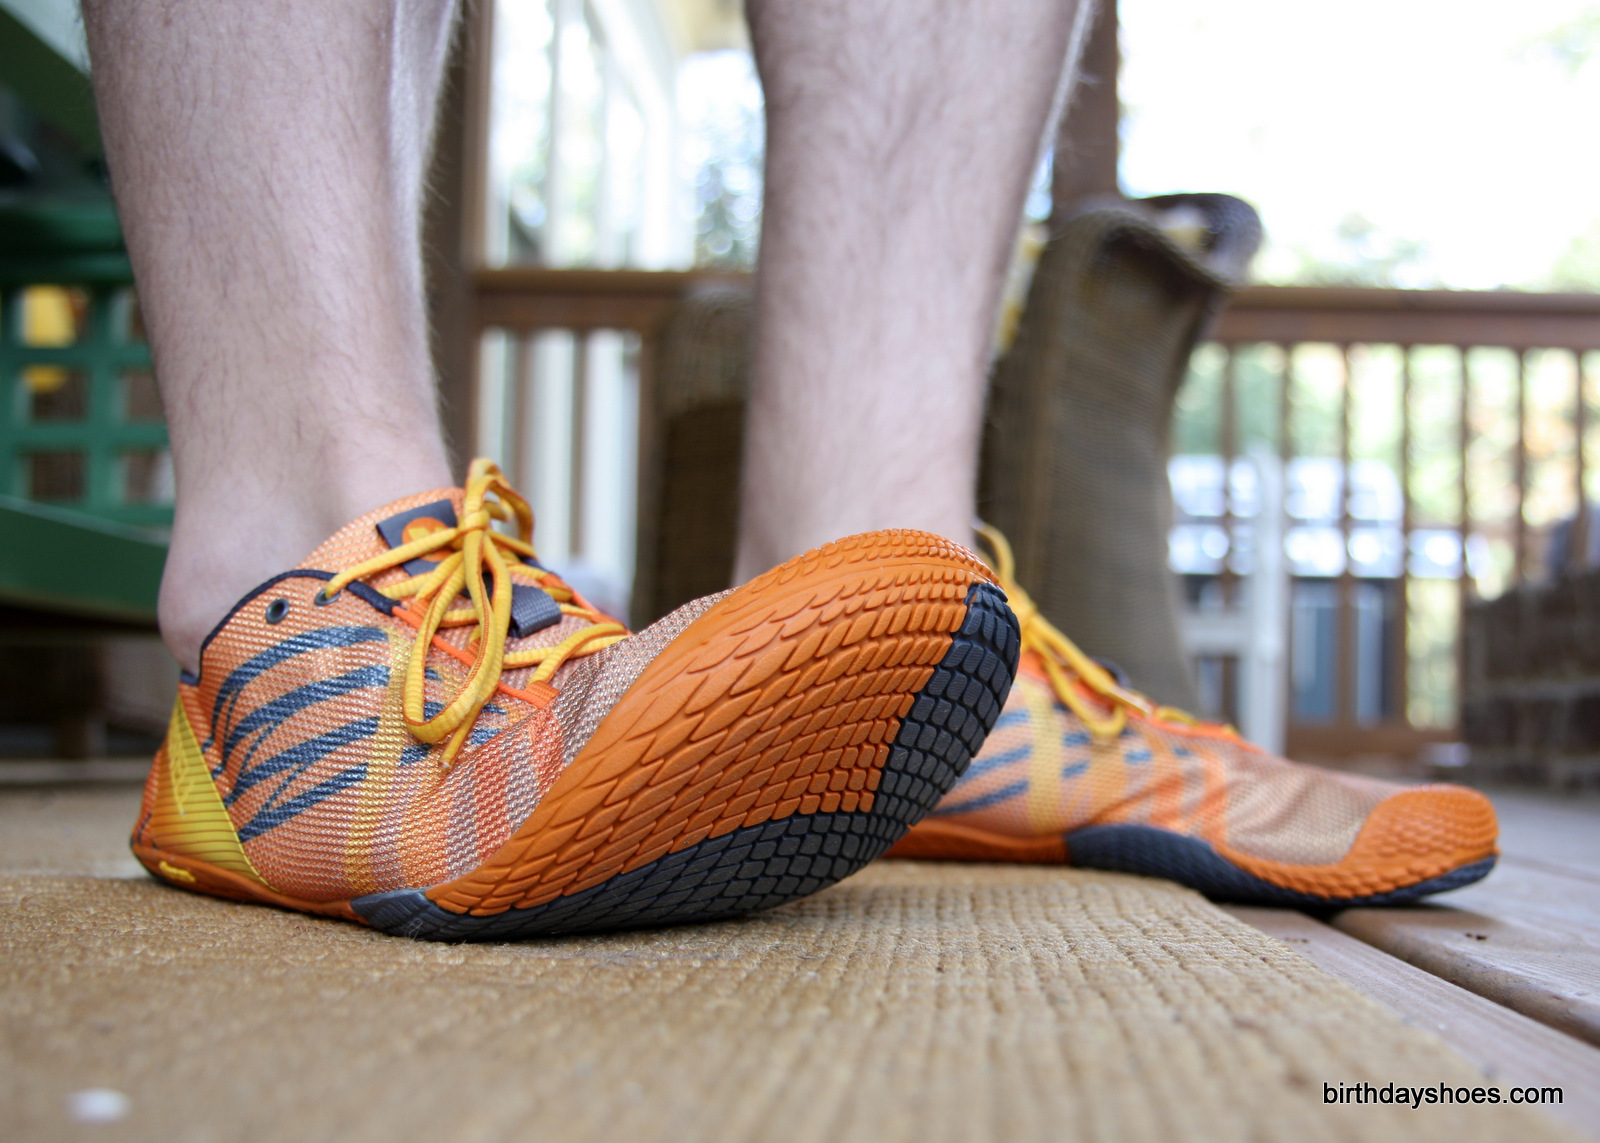 Vapor Glove Barefoot Initial Review – Birthday Shoes – Toe Shoes, Barefoot or Minimalist Shoes, and Reviews, News, Forums